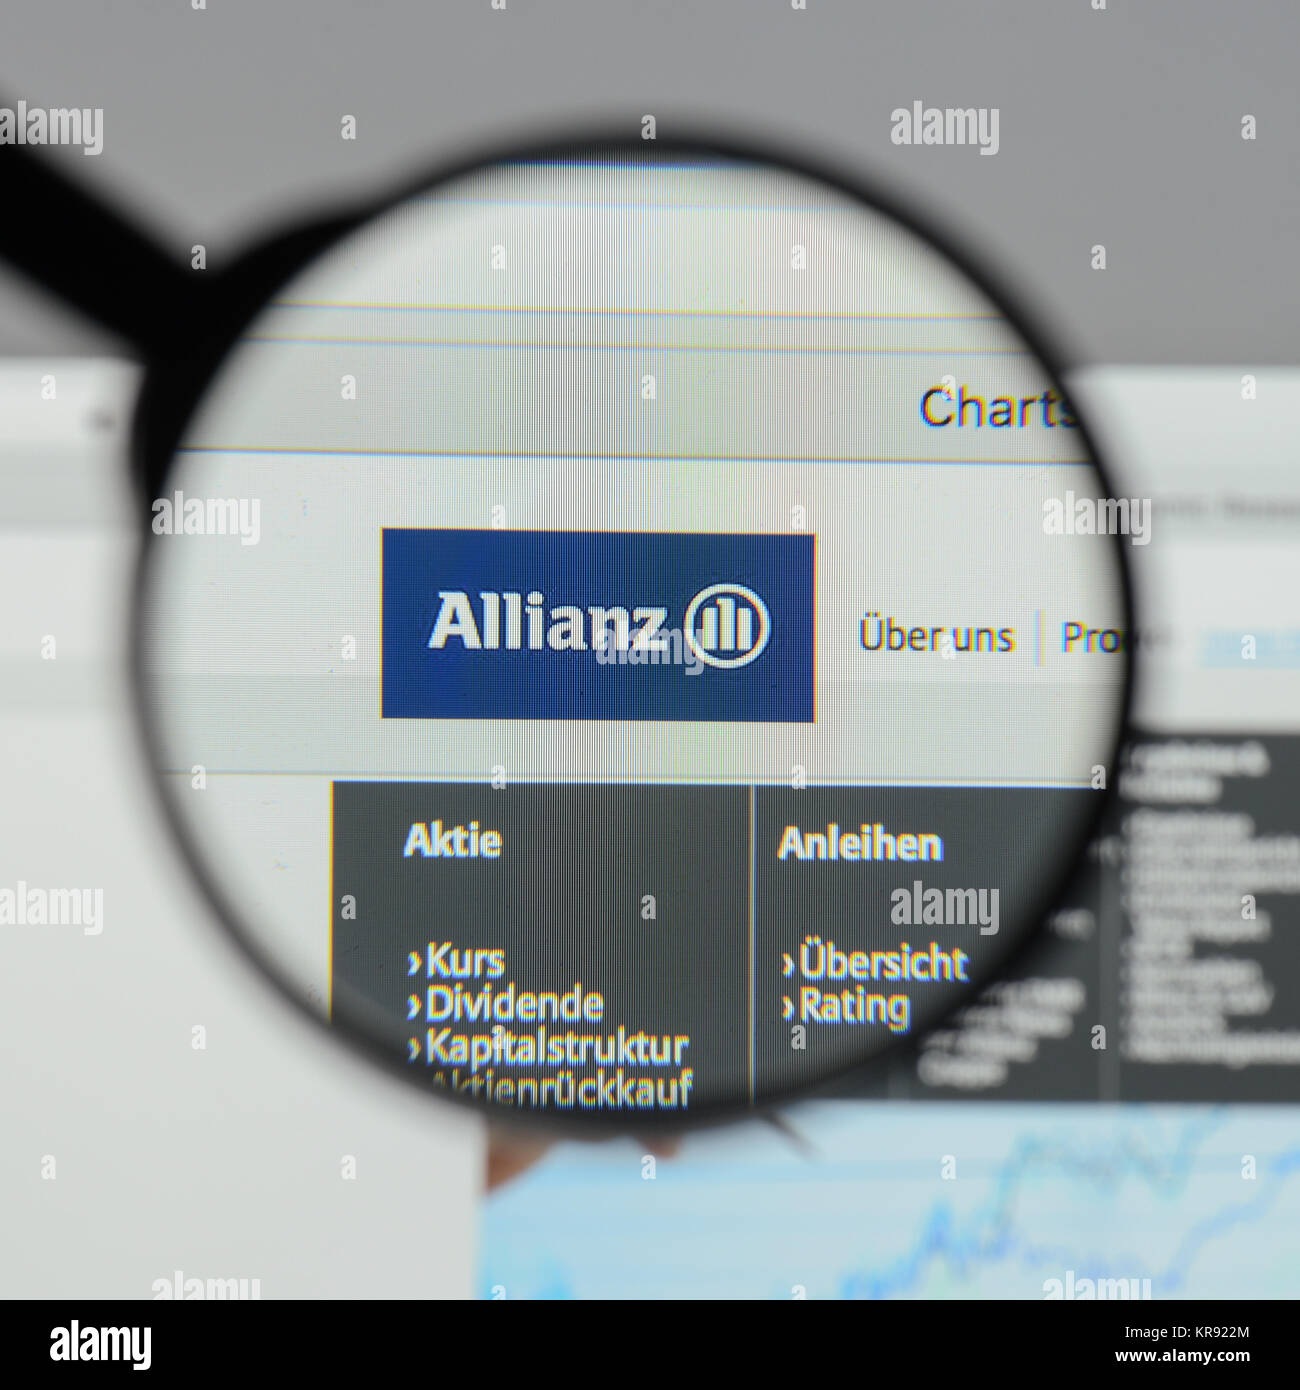 Allianz Screen High Resolution Stock Photography And Images Alamy